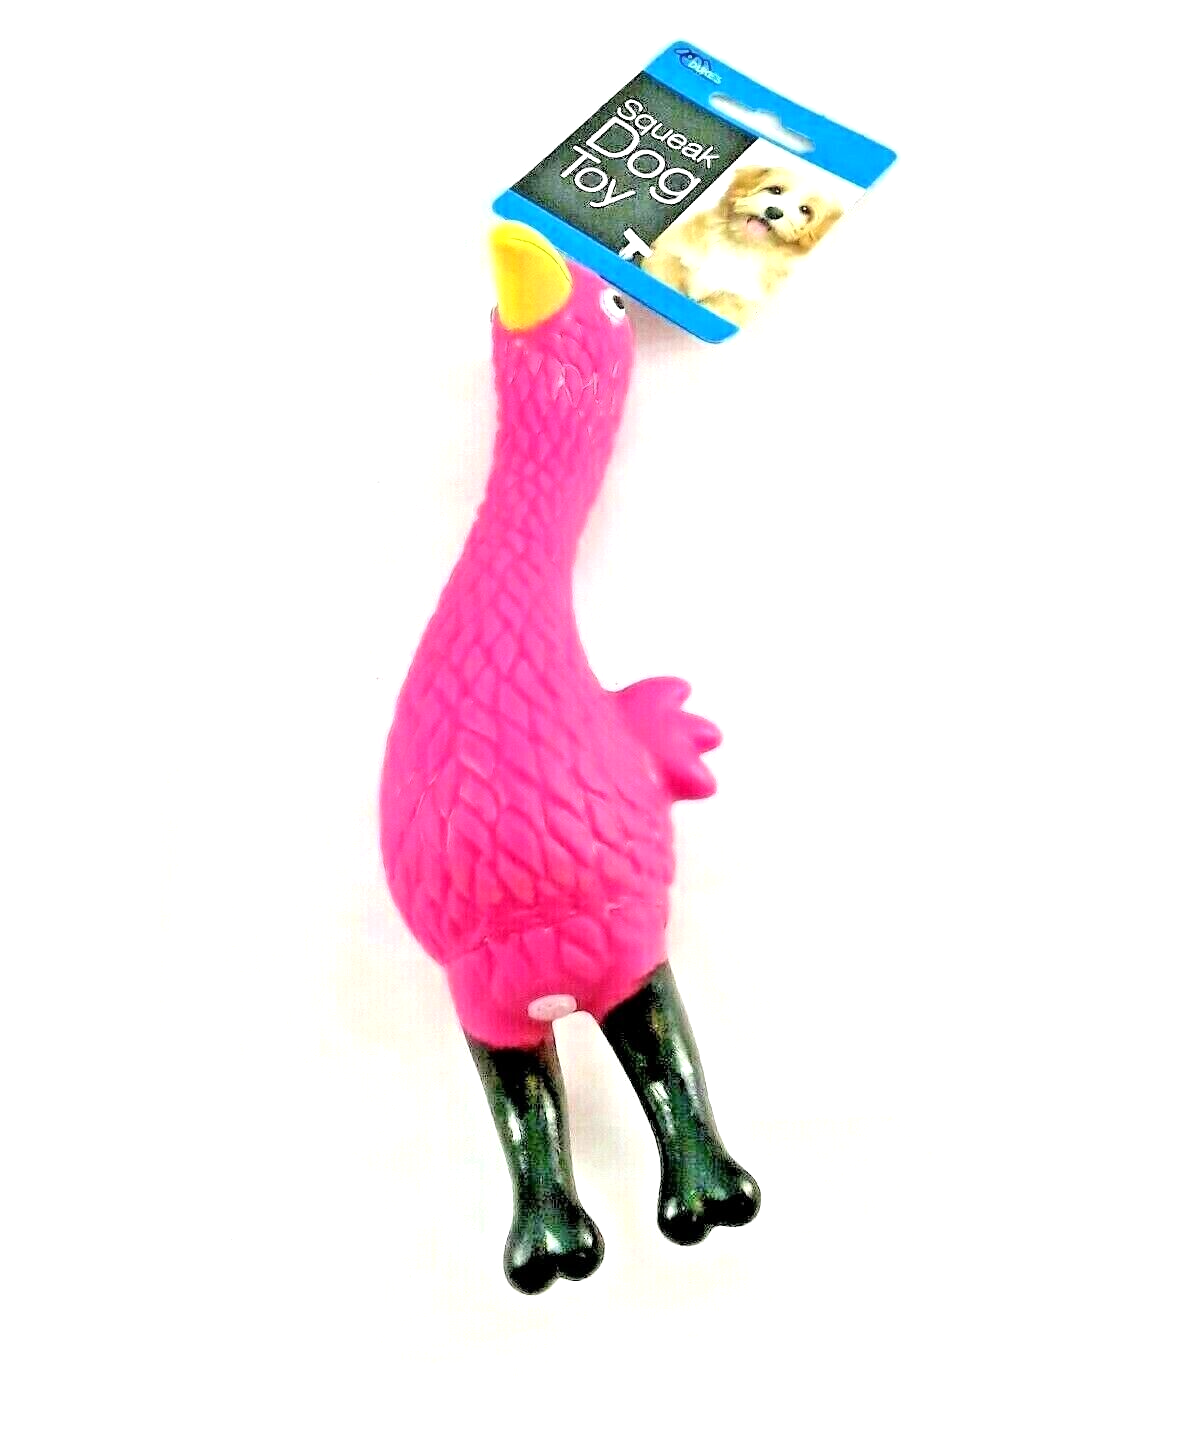 Dog Toys Pink Bird Dogs Puppies Toy 8" x 3" Small Medium Squeaky Squeaker - $8.81